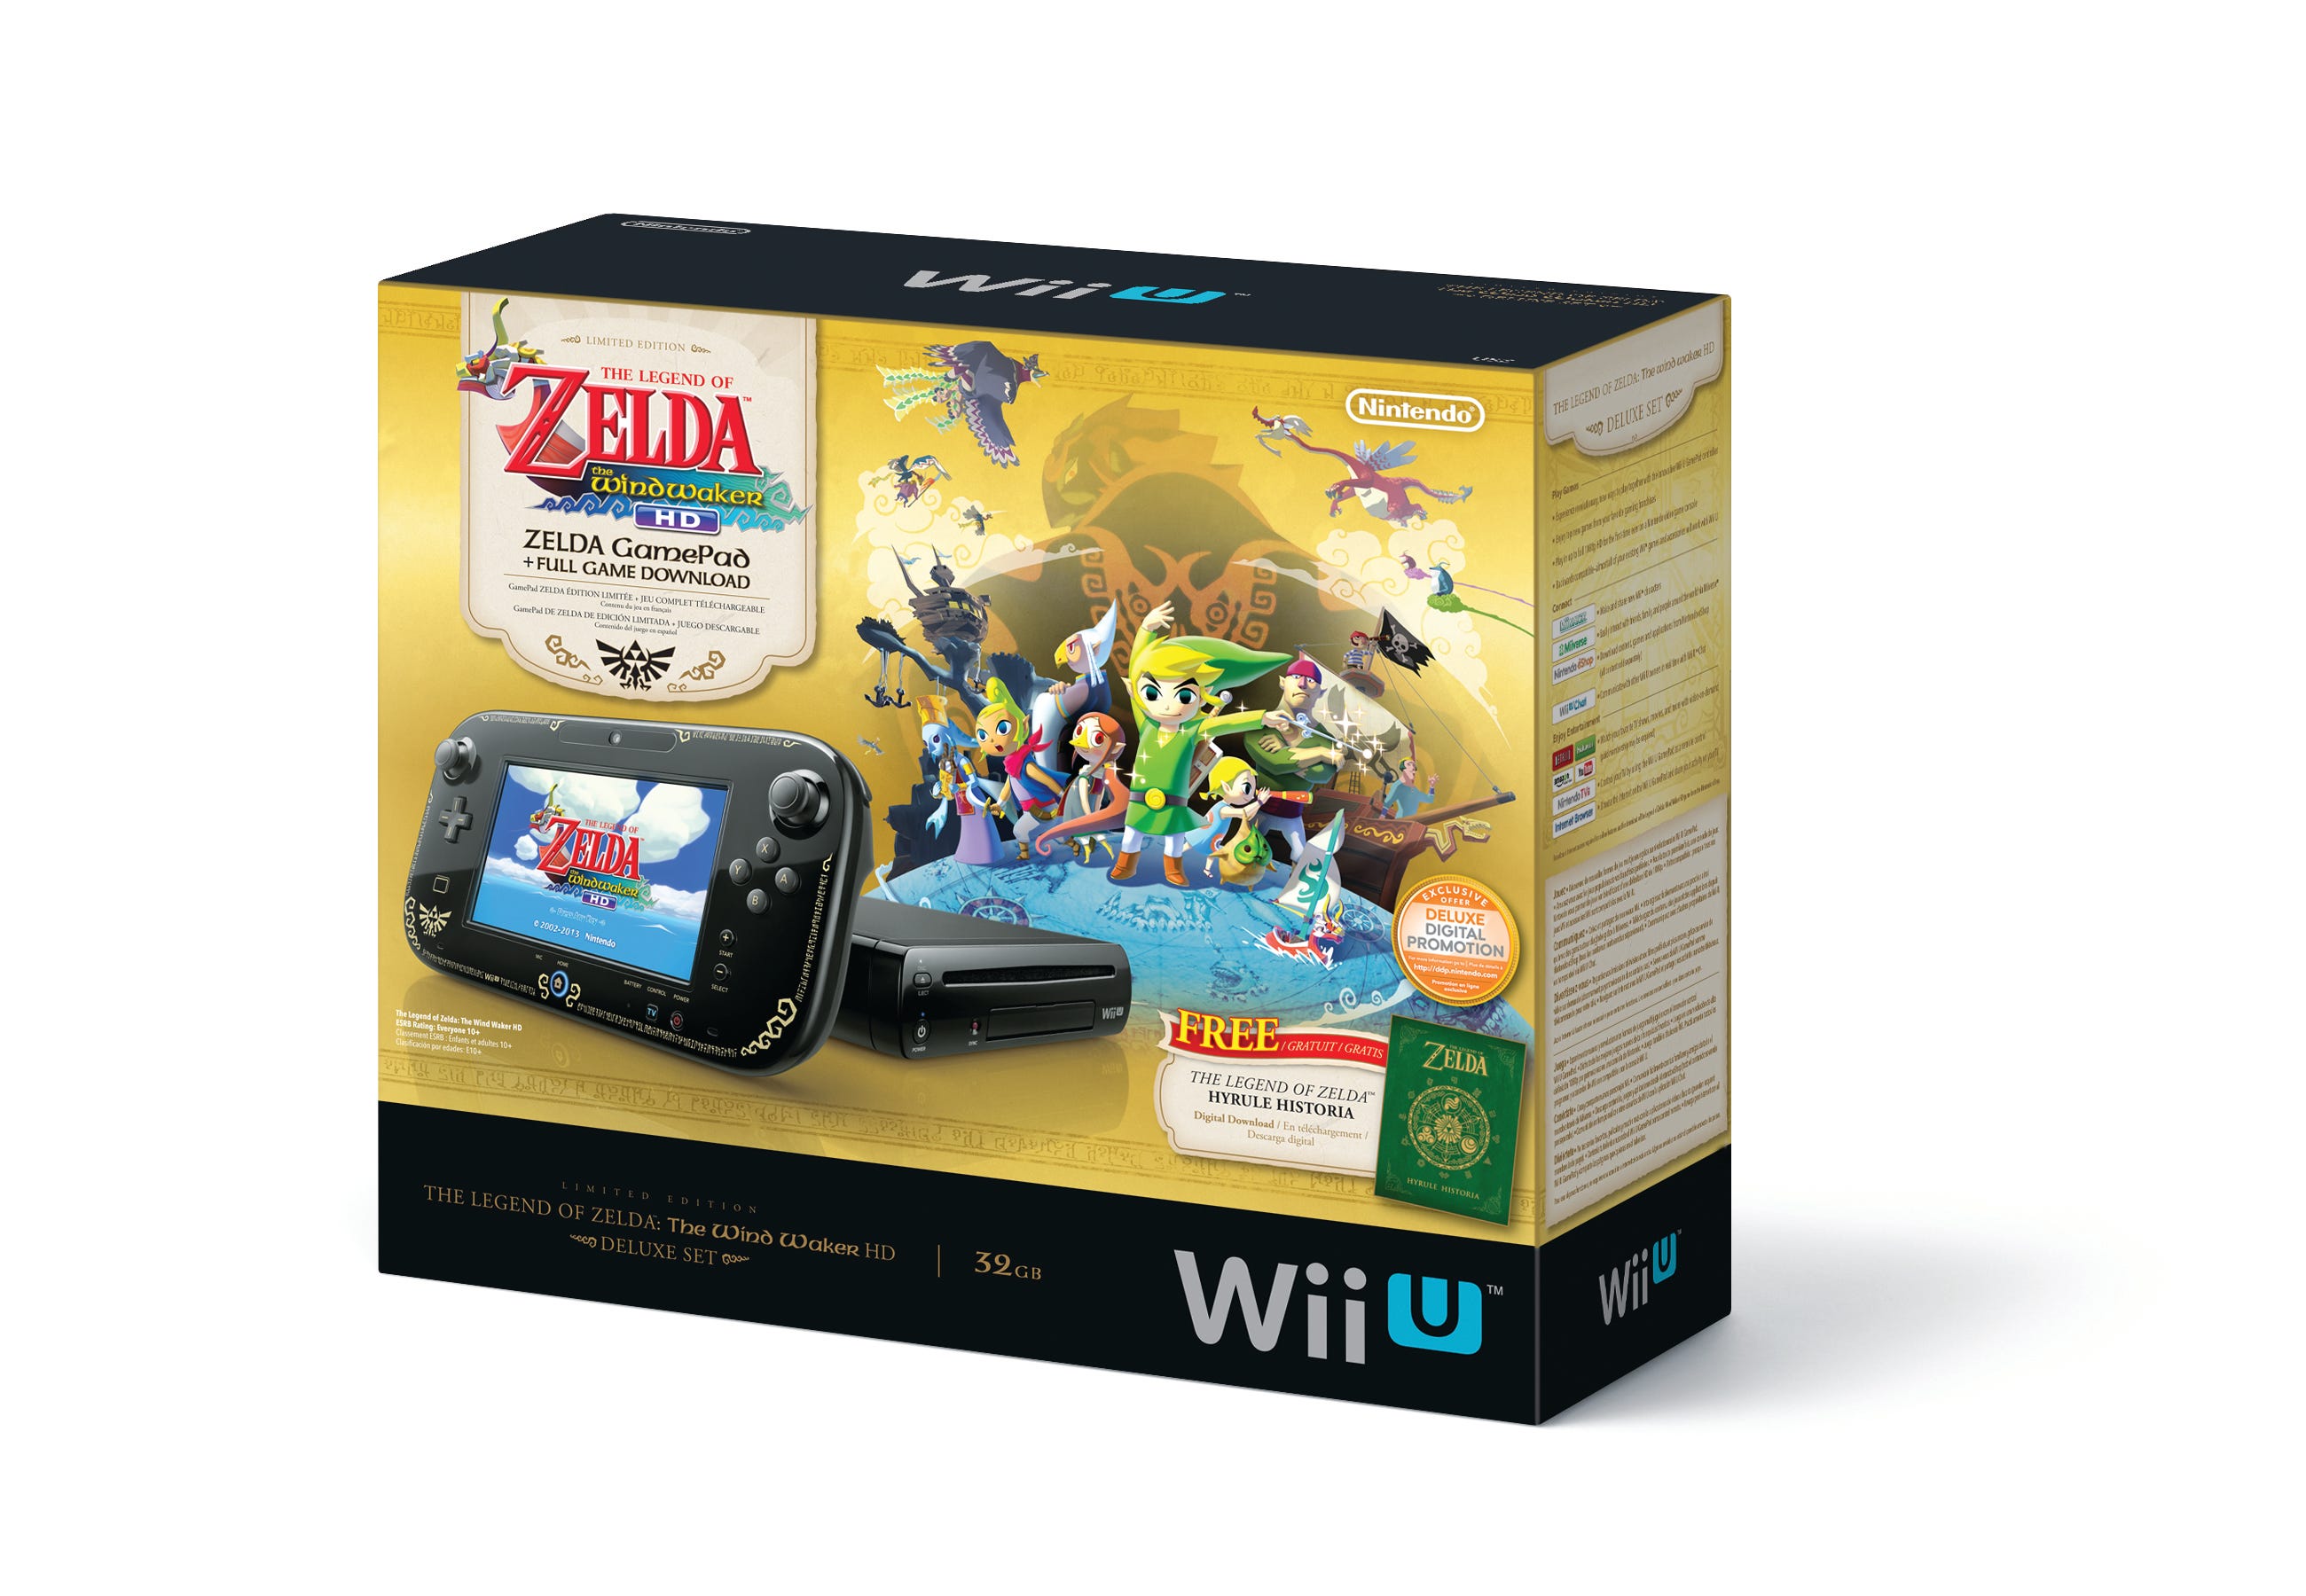 where to buy wii u console